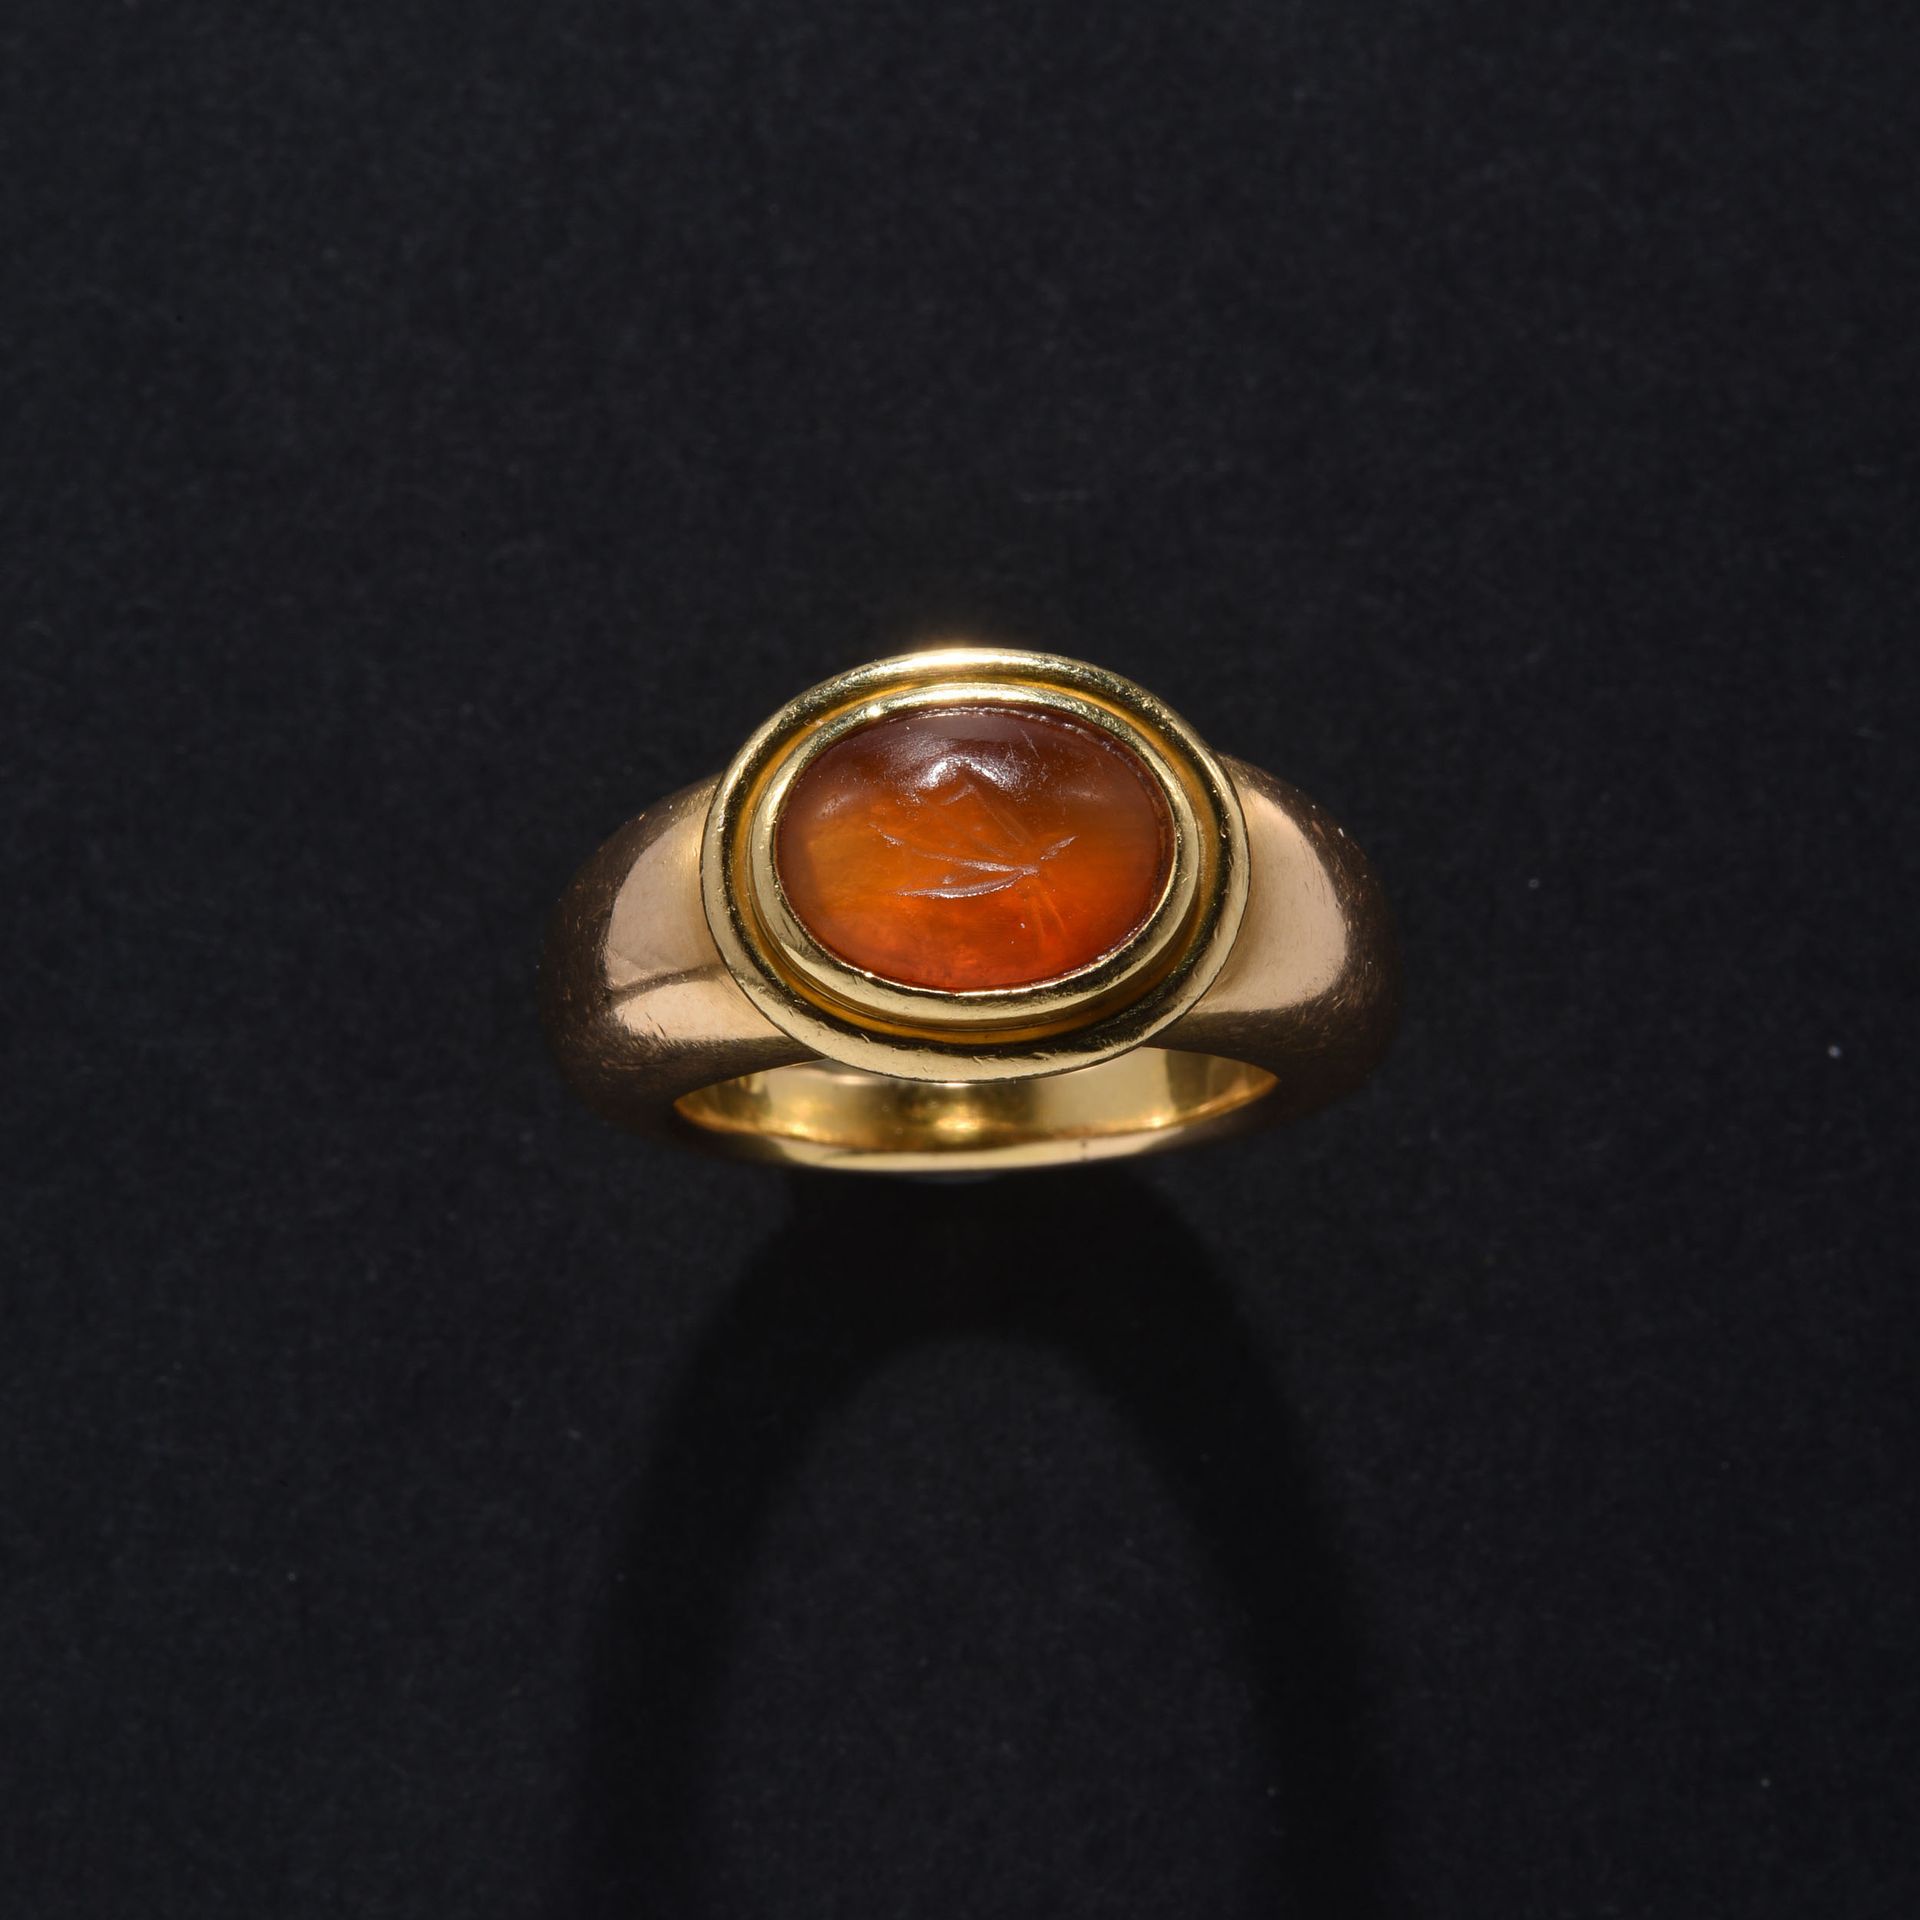 Null RING

Roman art, 1st century.

In modern gold, set with an intaglio on carn&hellip;